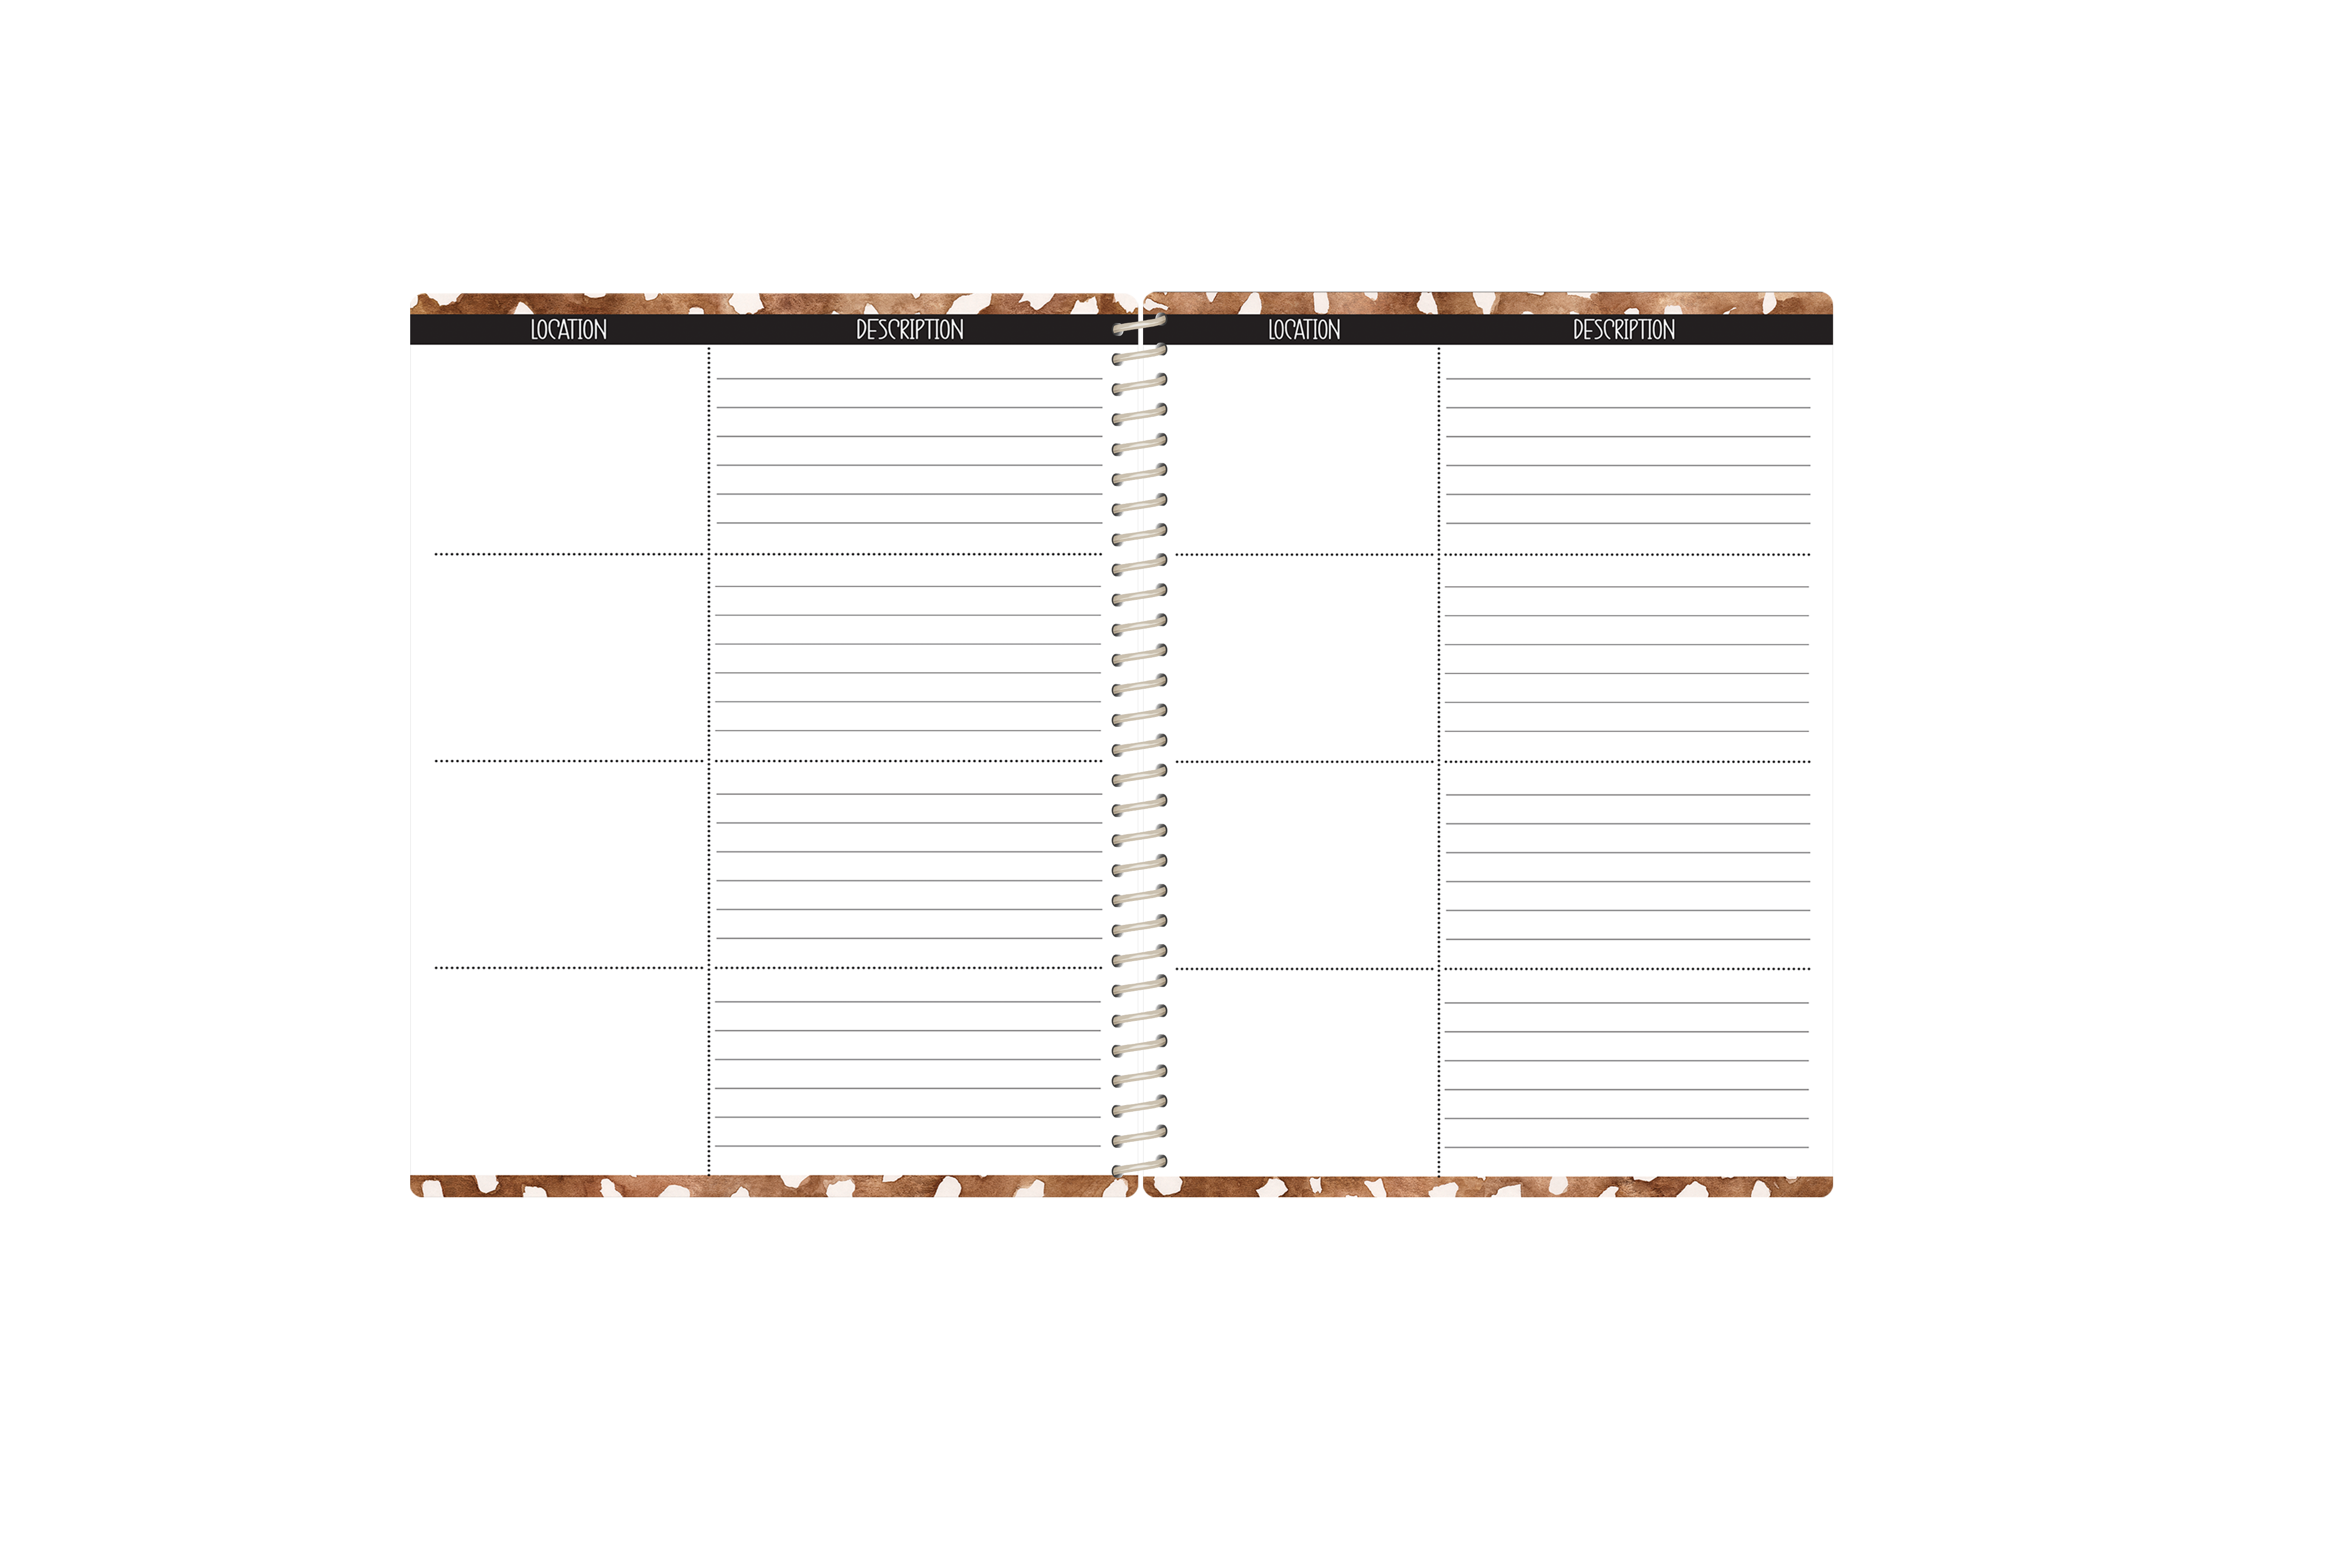 Custom Photography Appointment Book - CHOOSE A KBD BACKGROUND